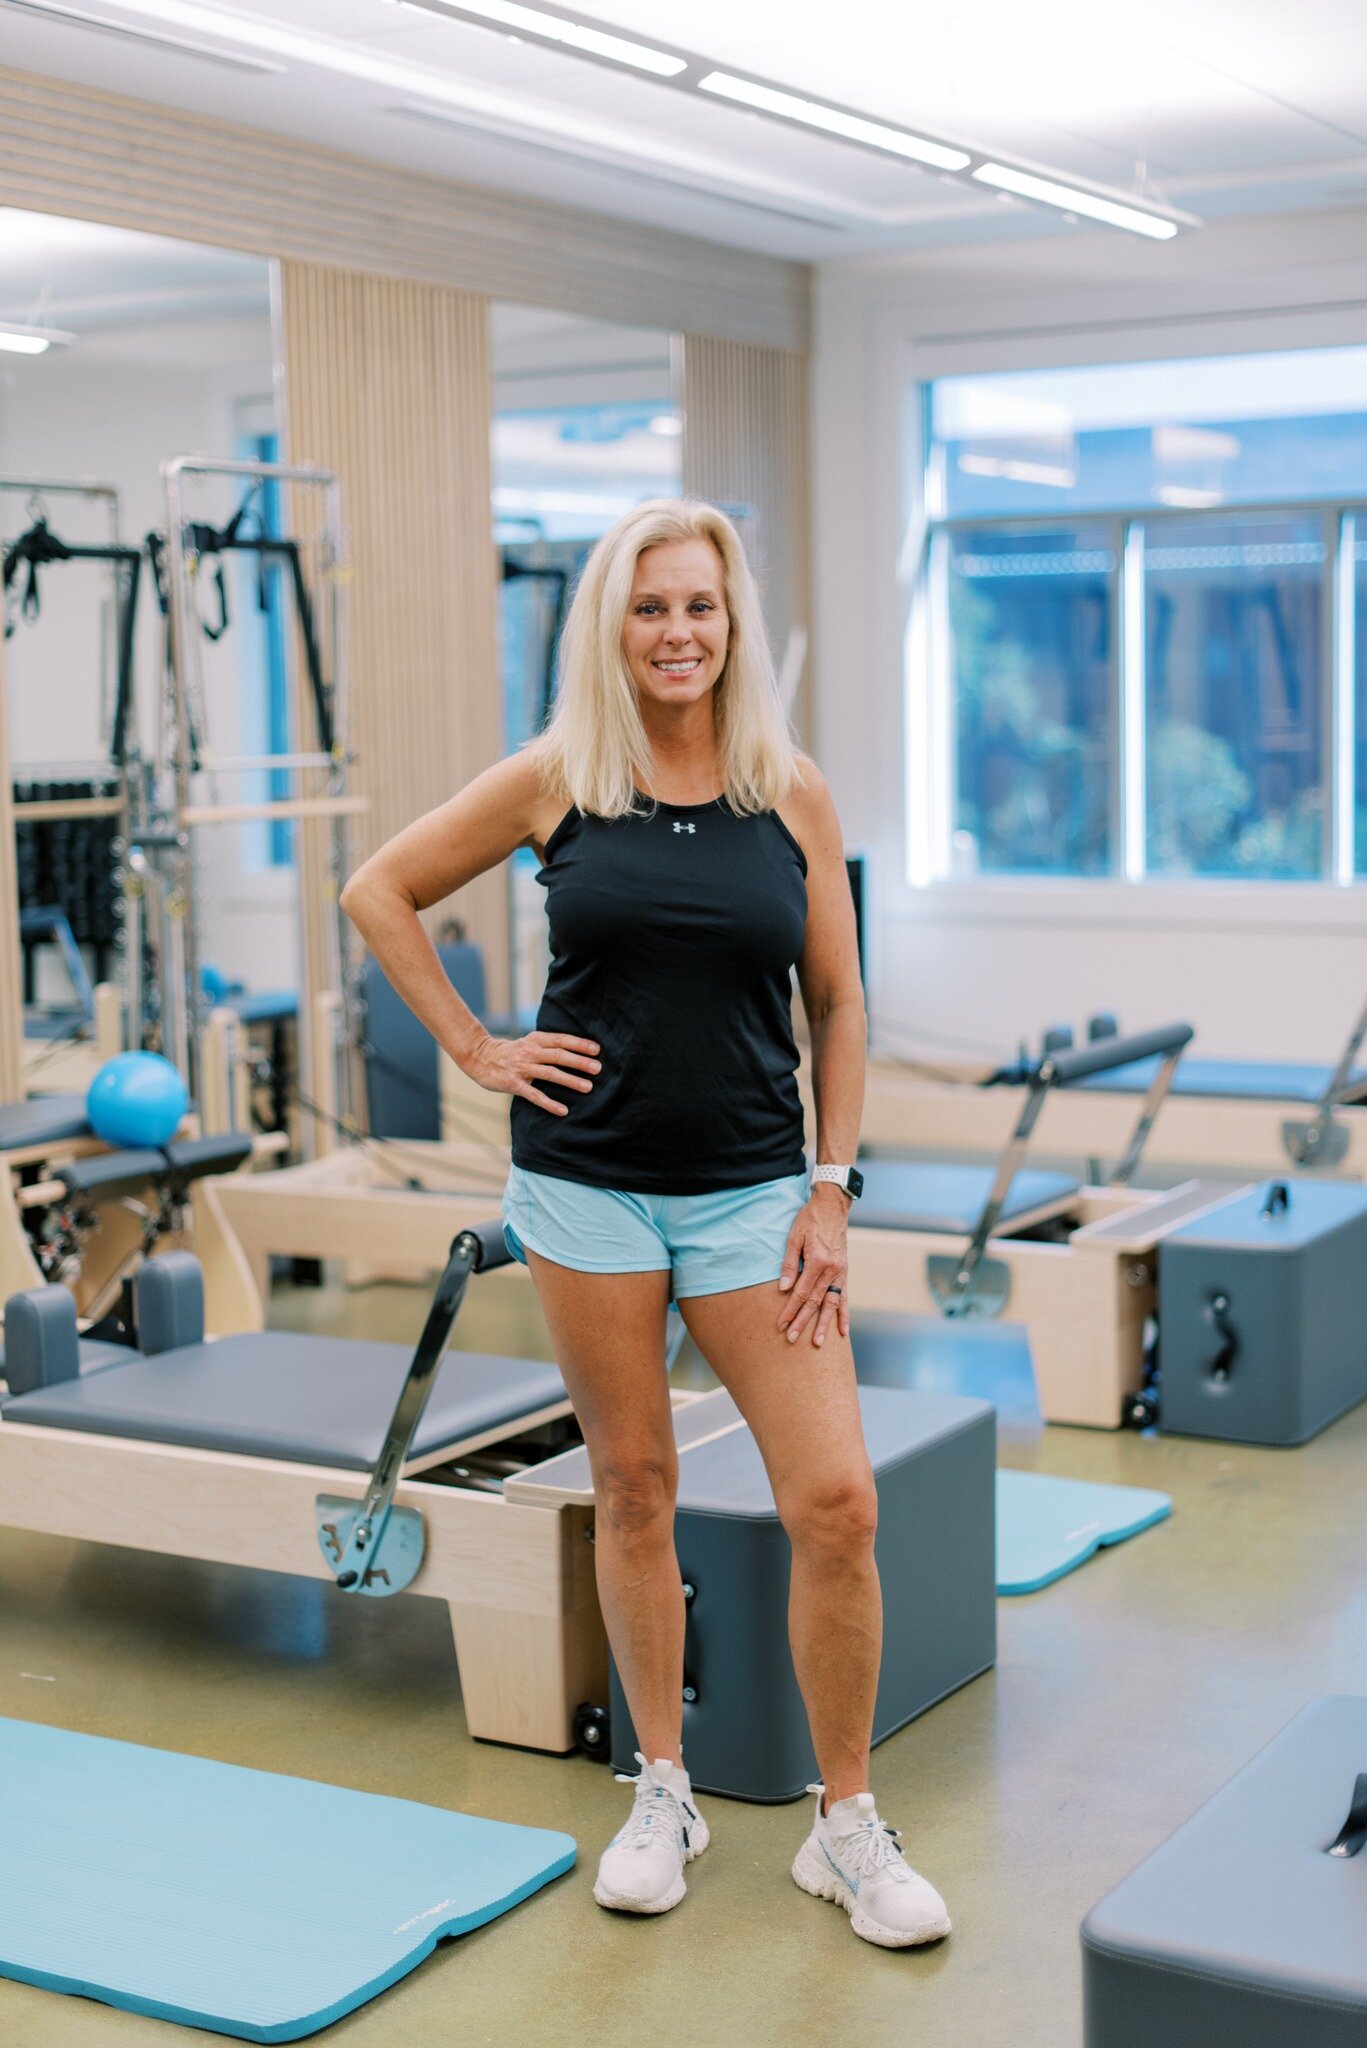 Introducing Donna Barber, the heart and soul behind Paradise Pilates! 💫 For our new members and friends, meet Donna, our passionate fitness instructor and owner, committed to guiding you on your Pilates journey. Join us in celebrating her unwavering